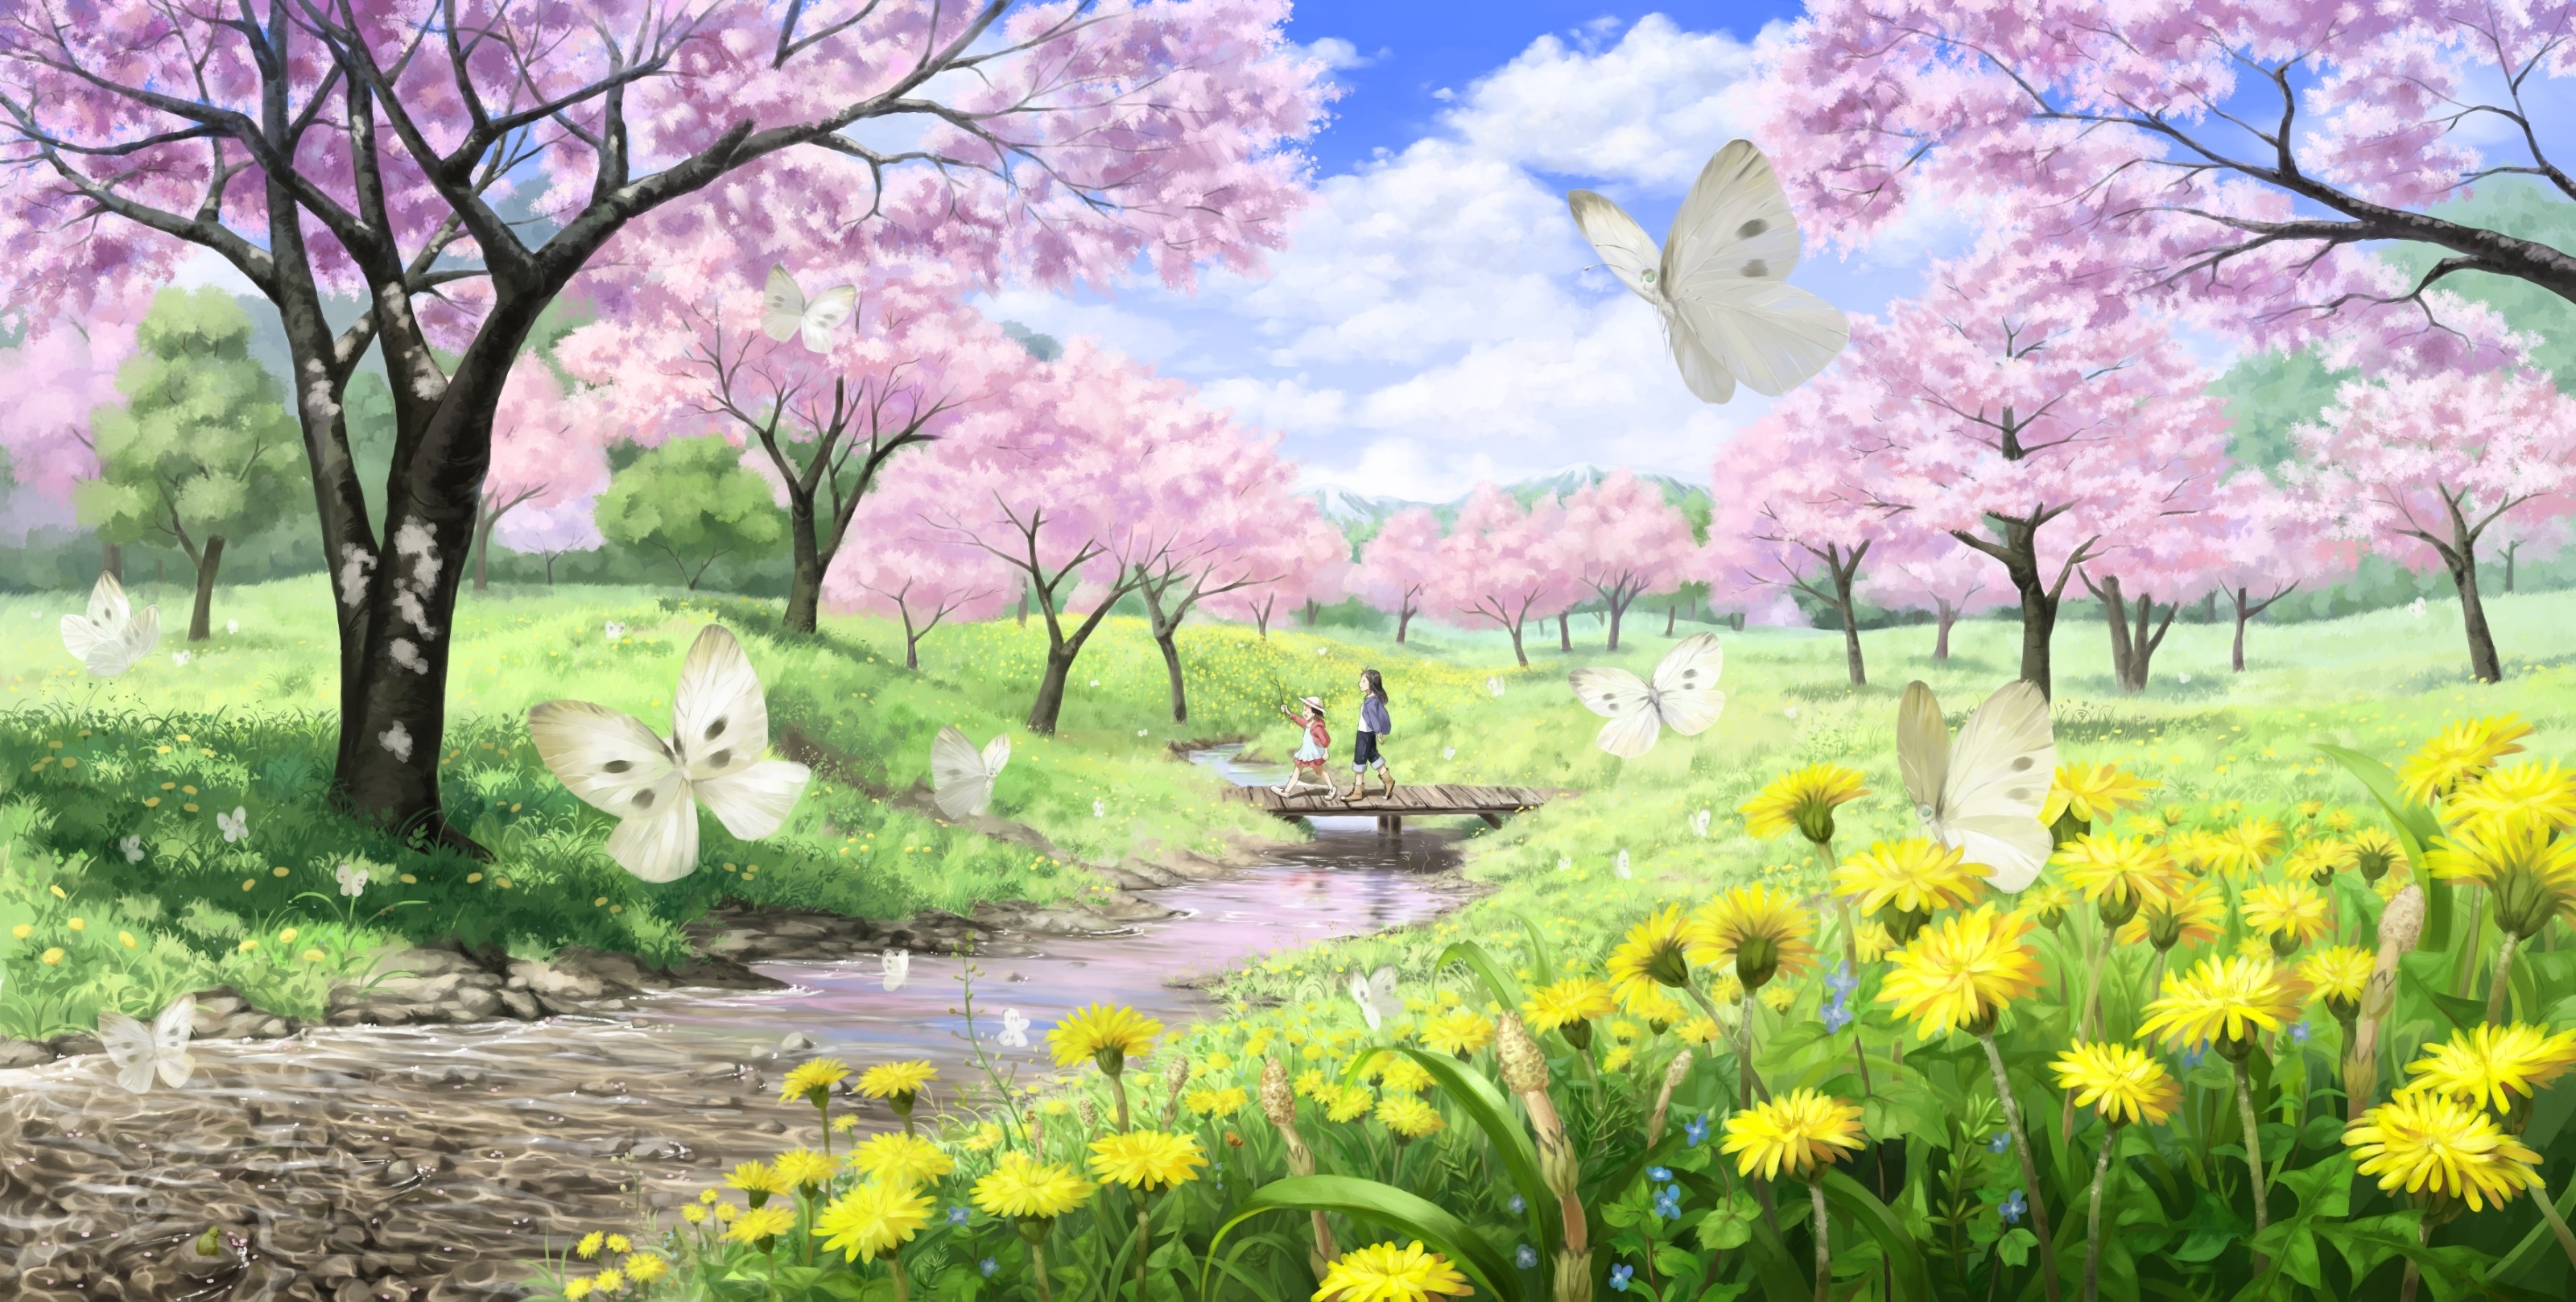 3200x1617 Wallpapers Spring Desktop Wallpapers And Backgrounds Gdtgtpo